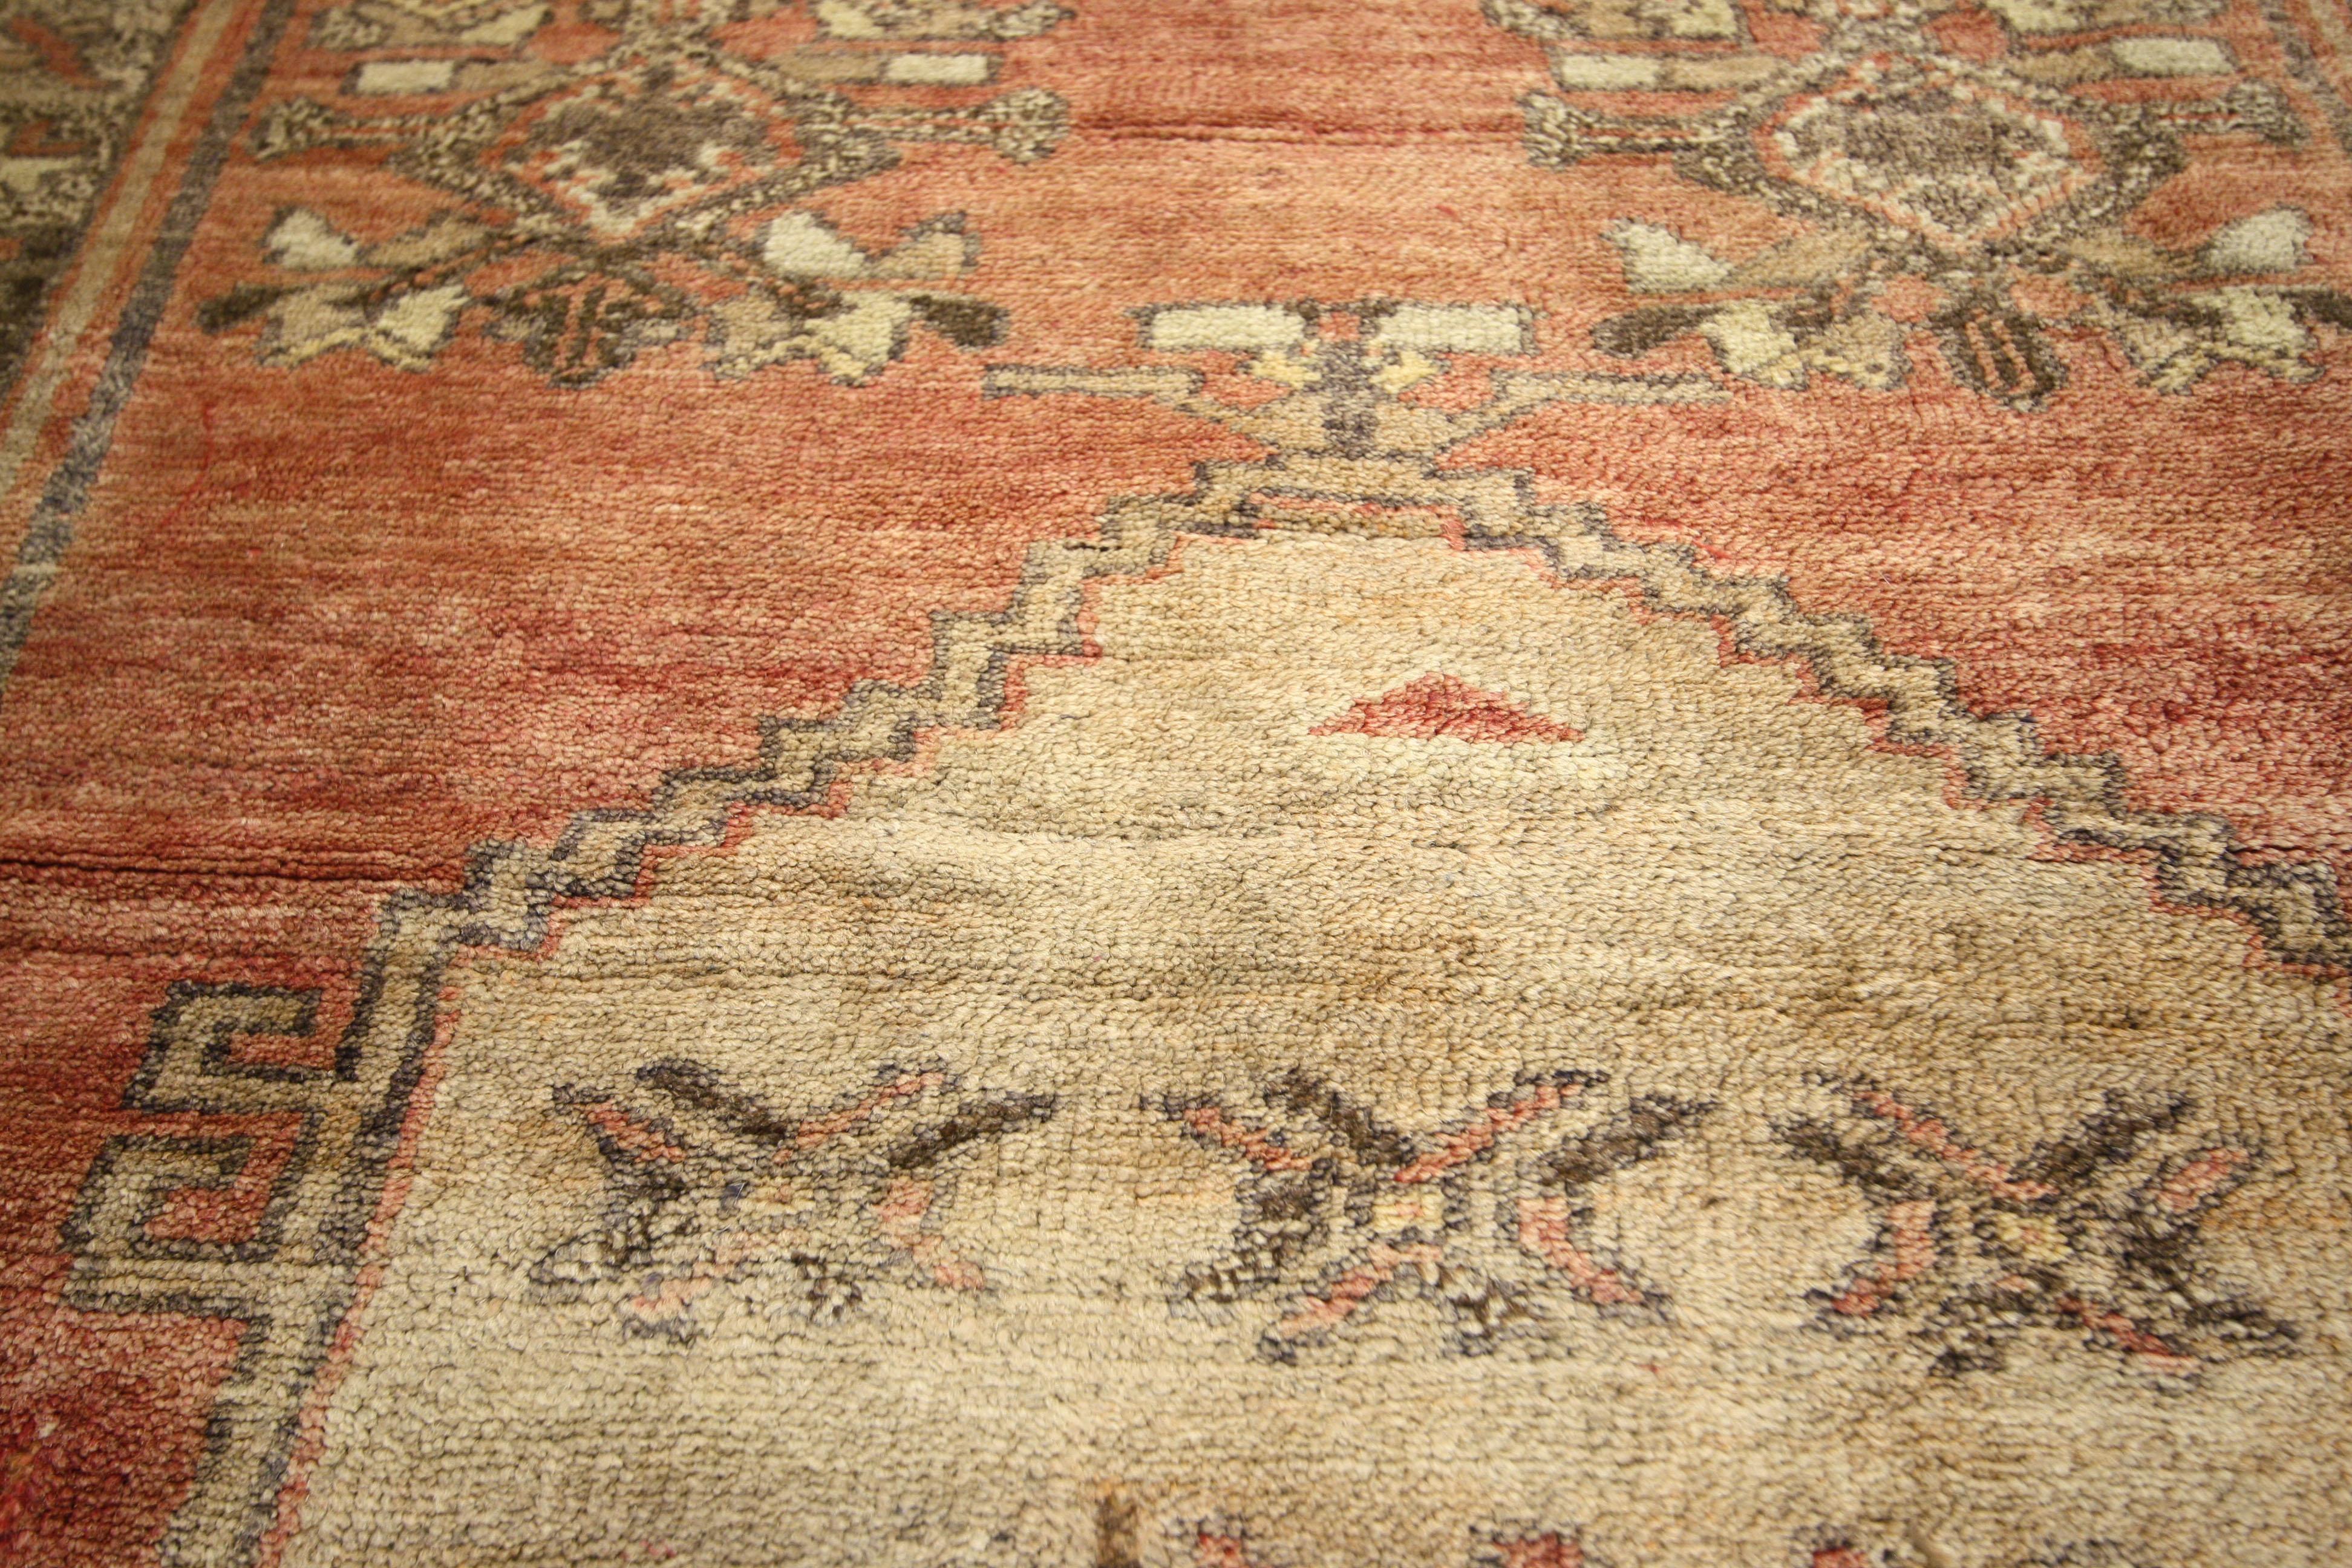 50190 Vintage Turkish Oushak Runner with Modern Rustic Spanish Revival Style 02'09 x 10'09. Emanating timeless elegance and grace of Spanish Colonial aesthetics, this hand knotted wool vintage Turkish Oushak runner is steeped in Anatolian history